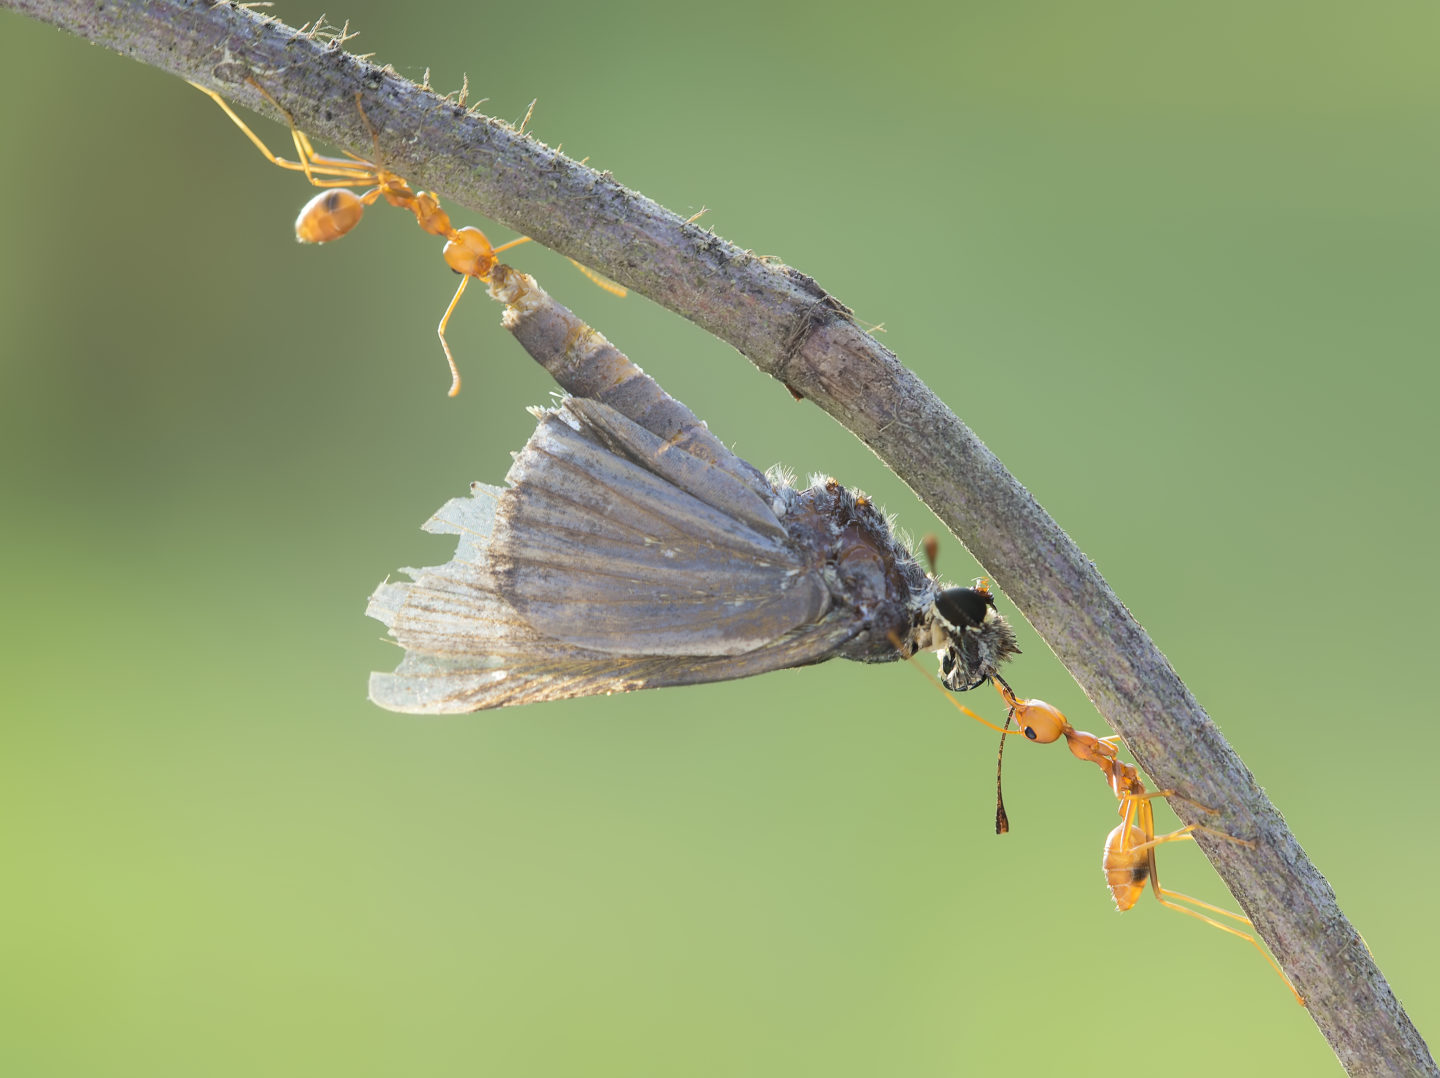 Two weaver ants work together in a team to carry a captured dragonfly